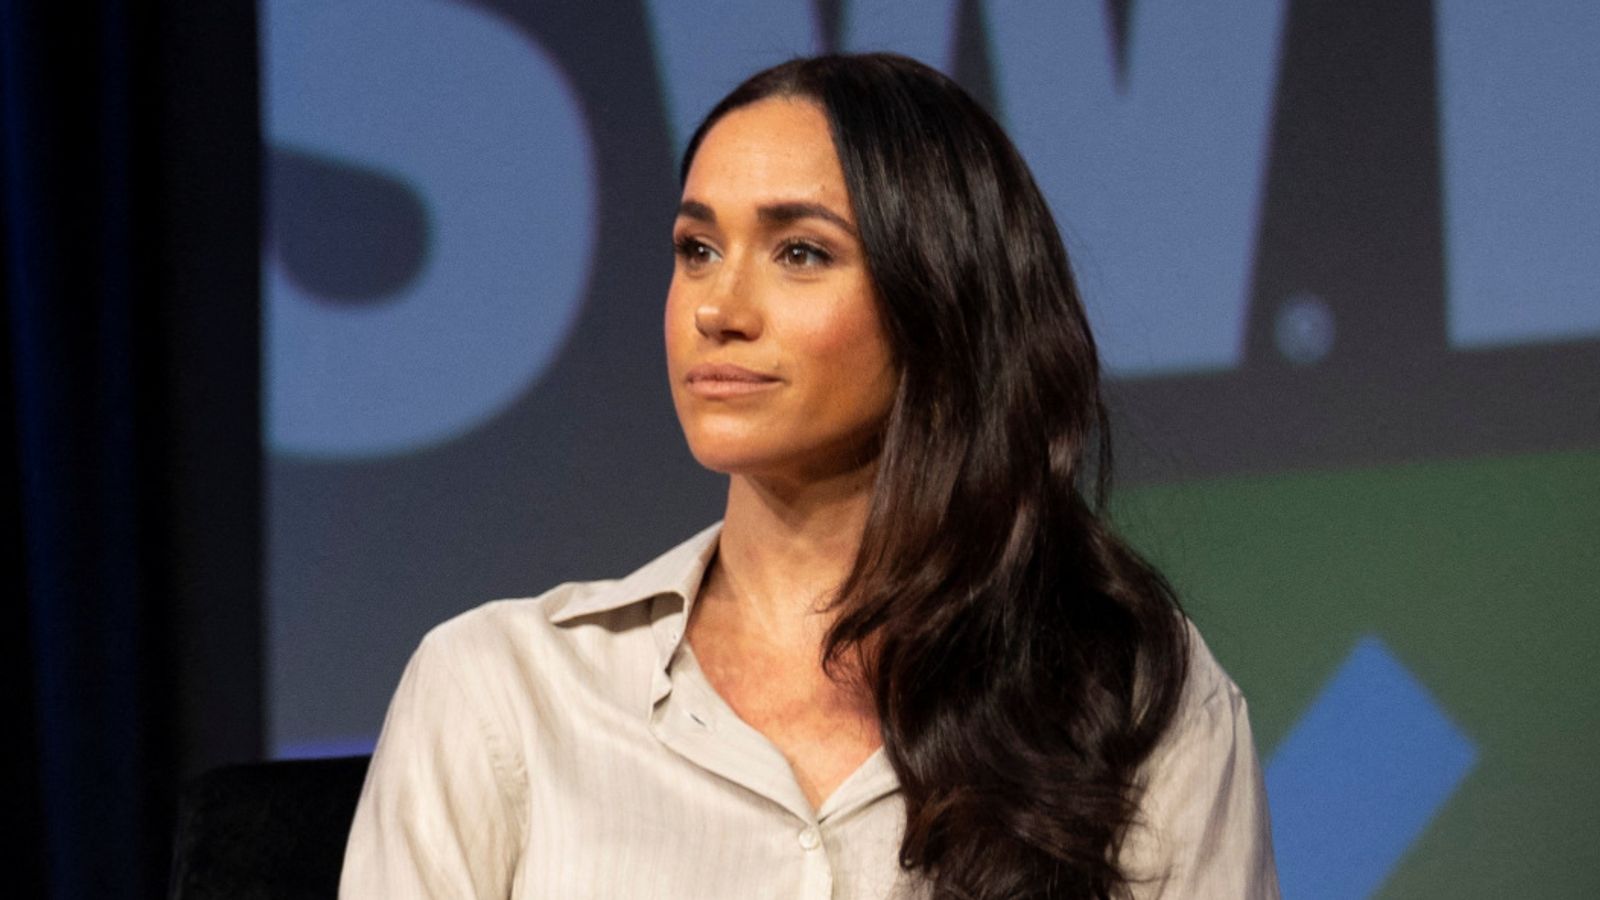 Meghan says she suffered 'hateful' and 'cruel' abuse while she was pregnant